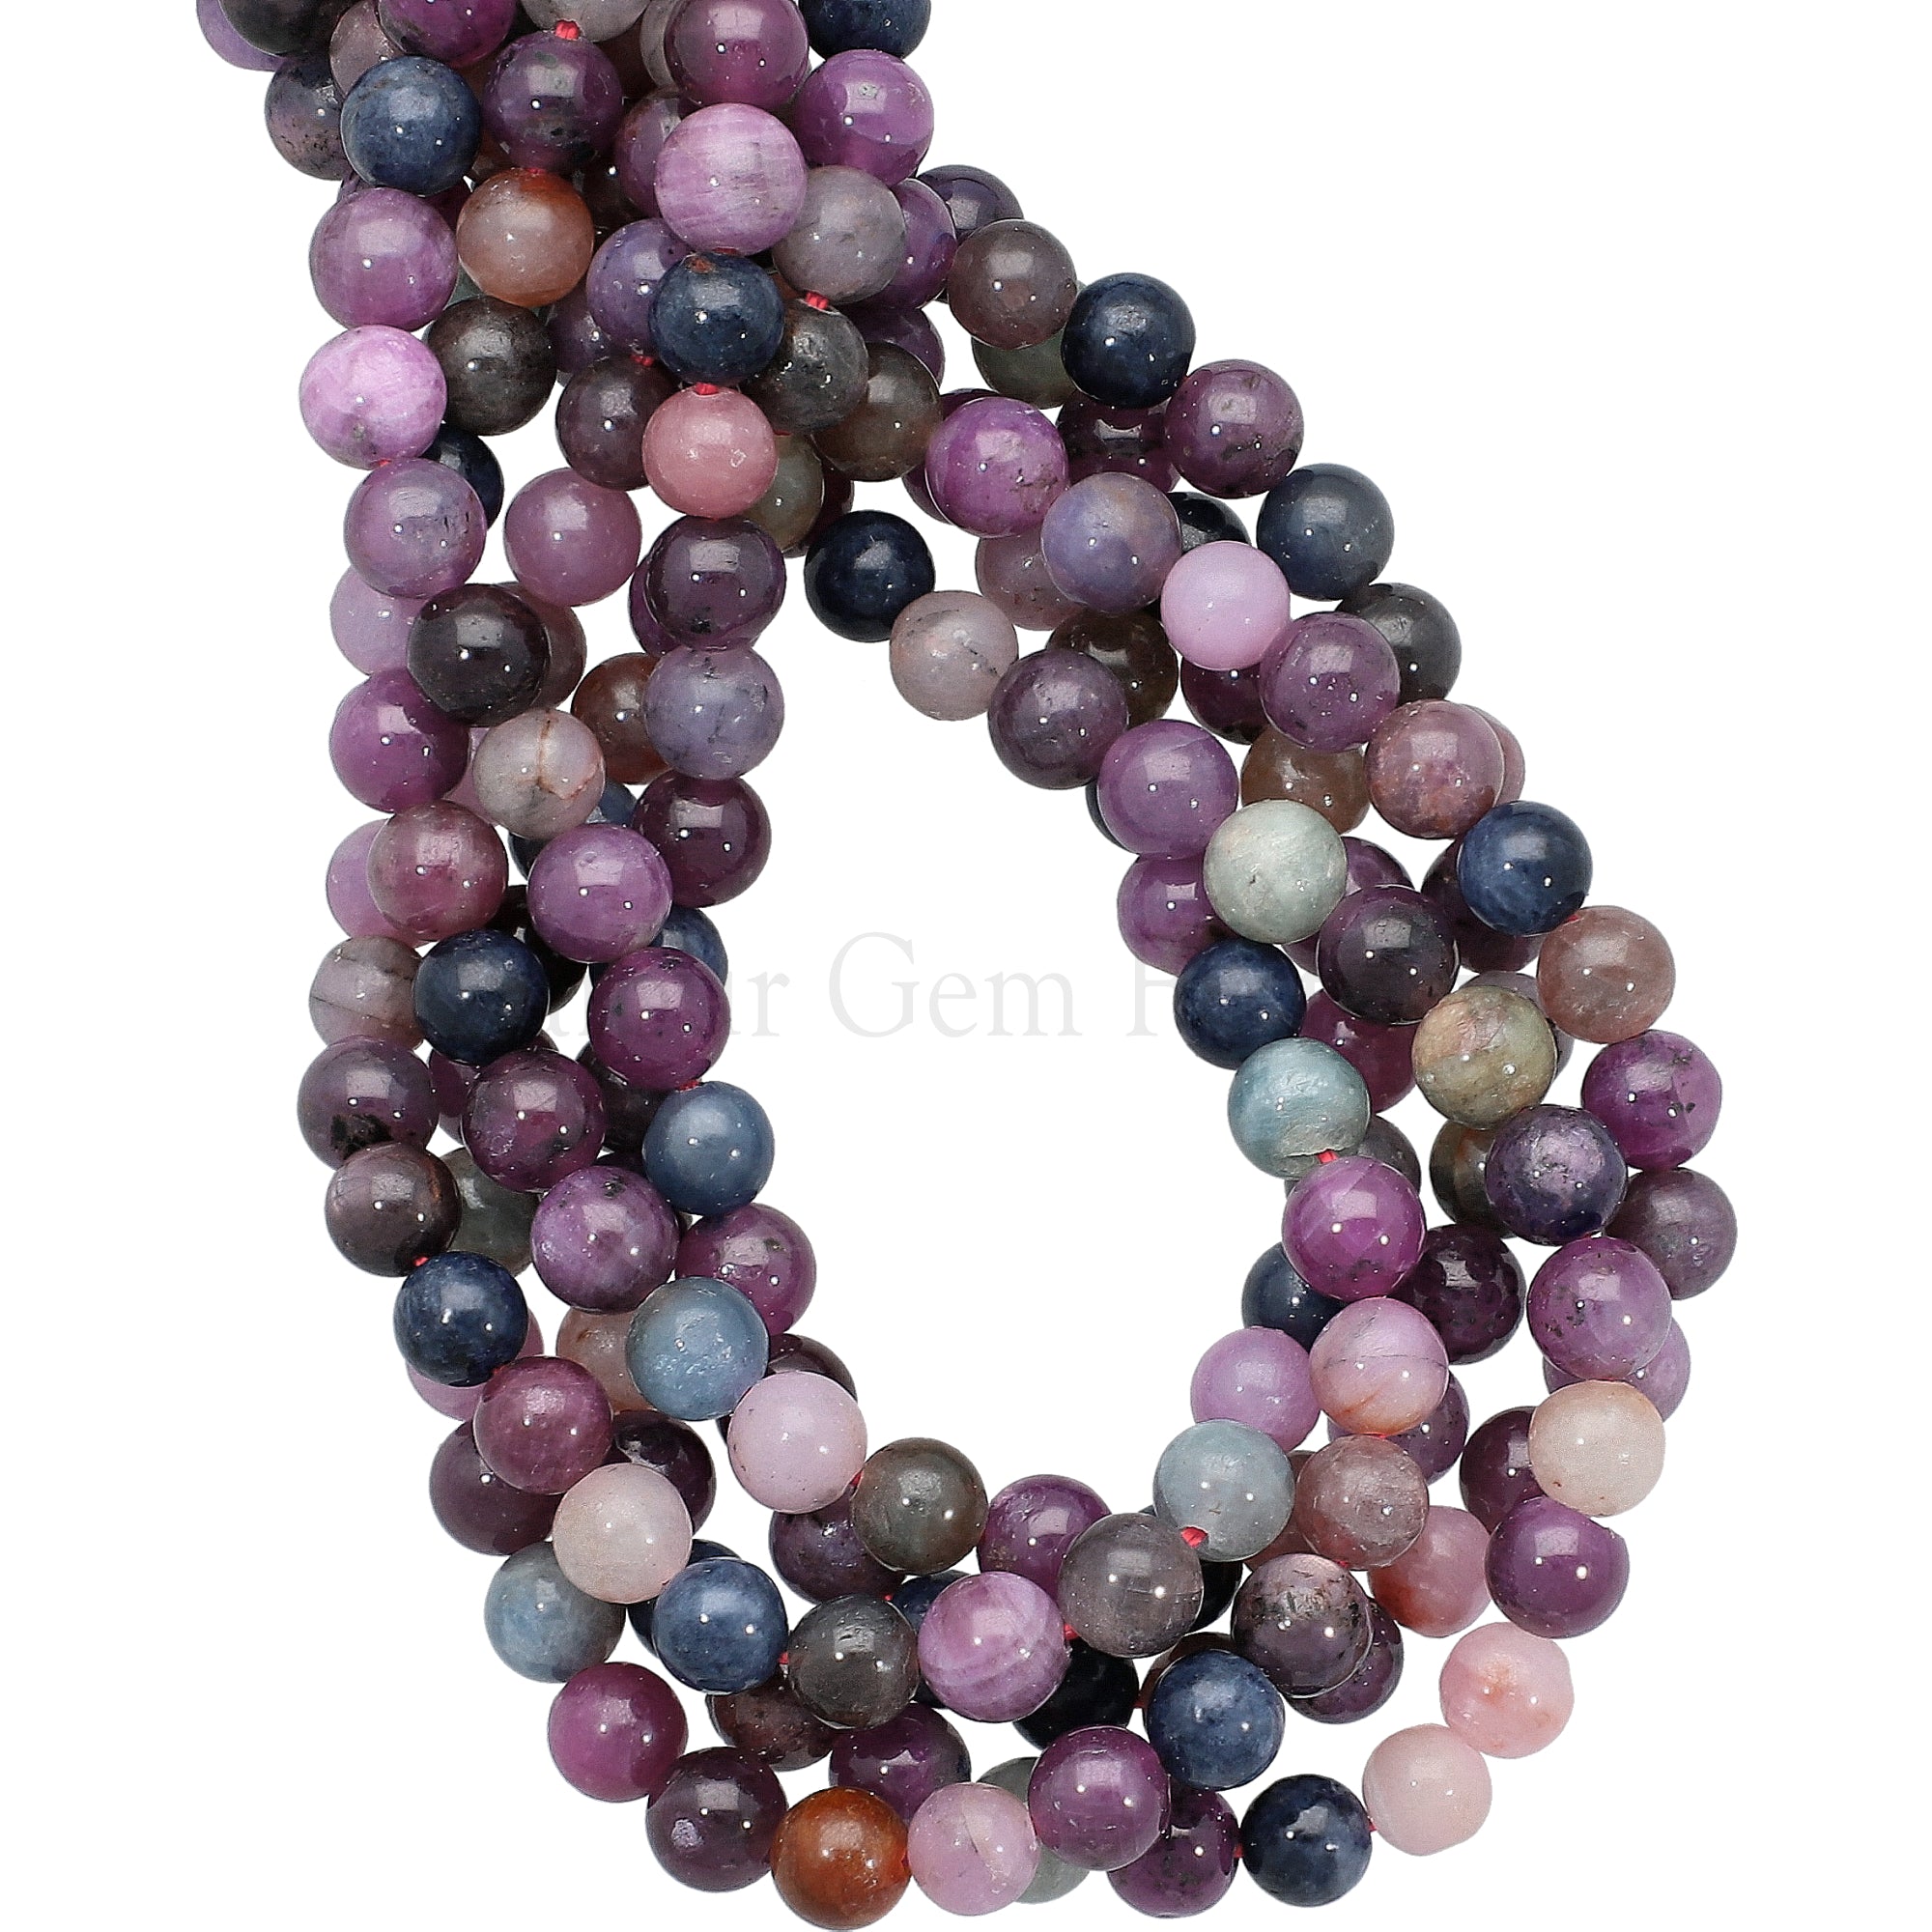 6 MM Natural Multi Sapphire Smooth Round Beads 15 Inches Strand